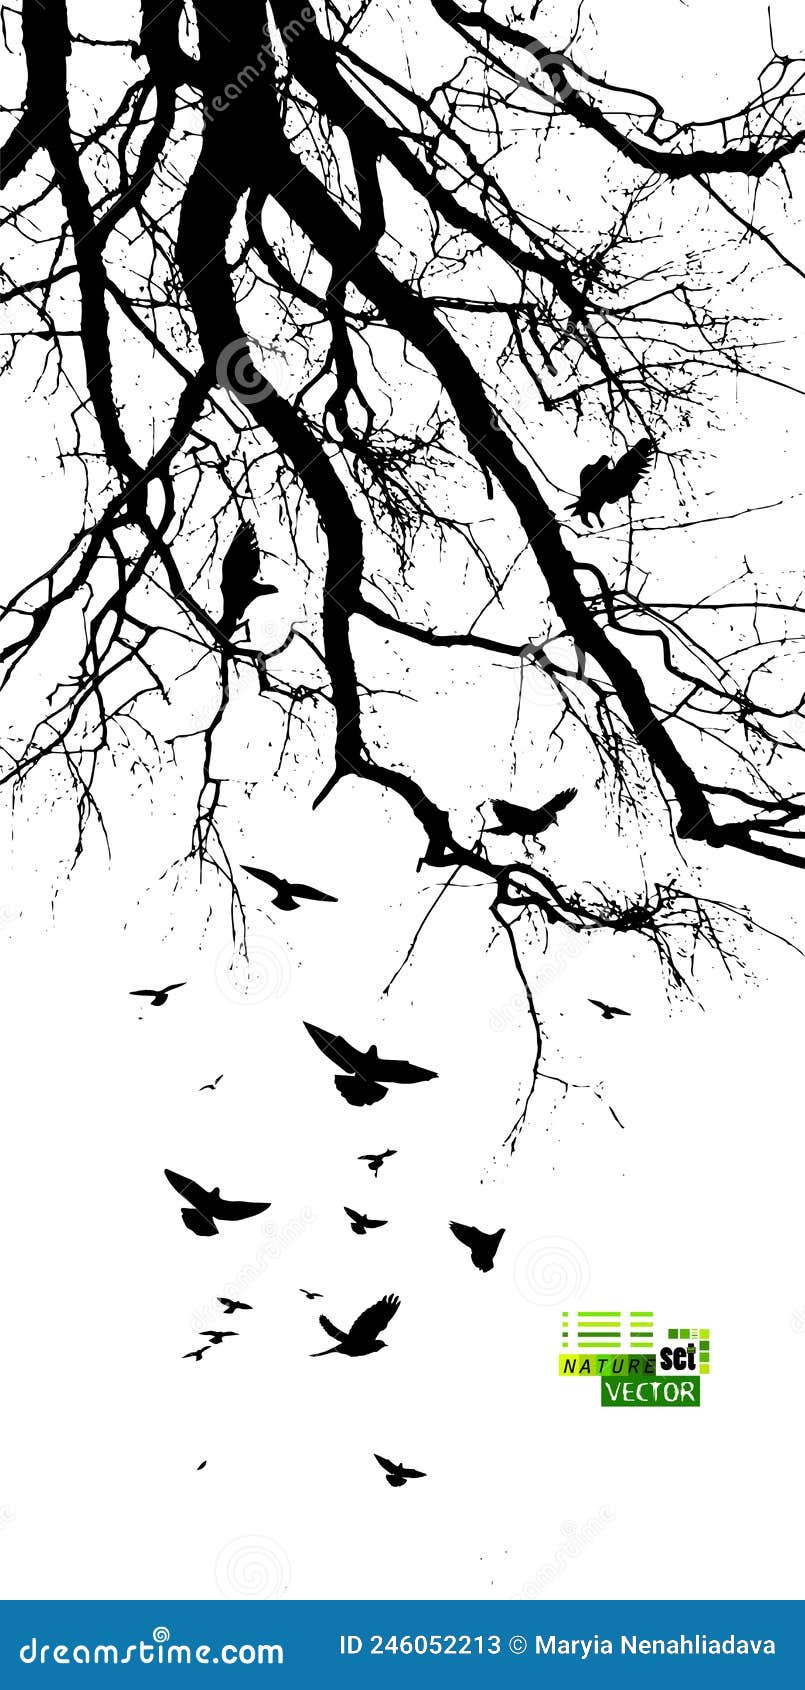 Realistic Illustration with Silhouettes of Three Birds - Crows or ...